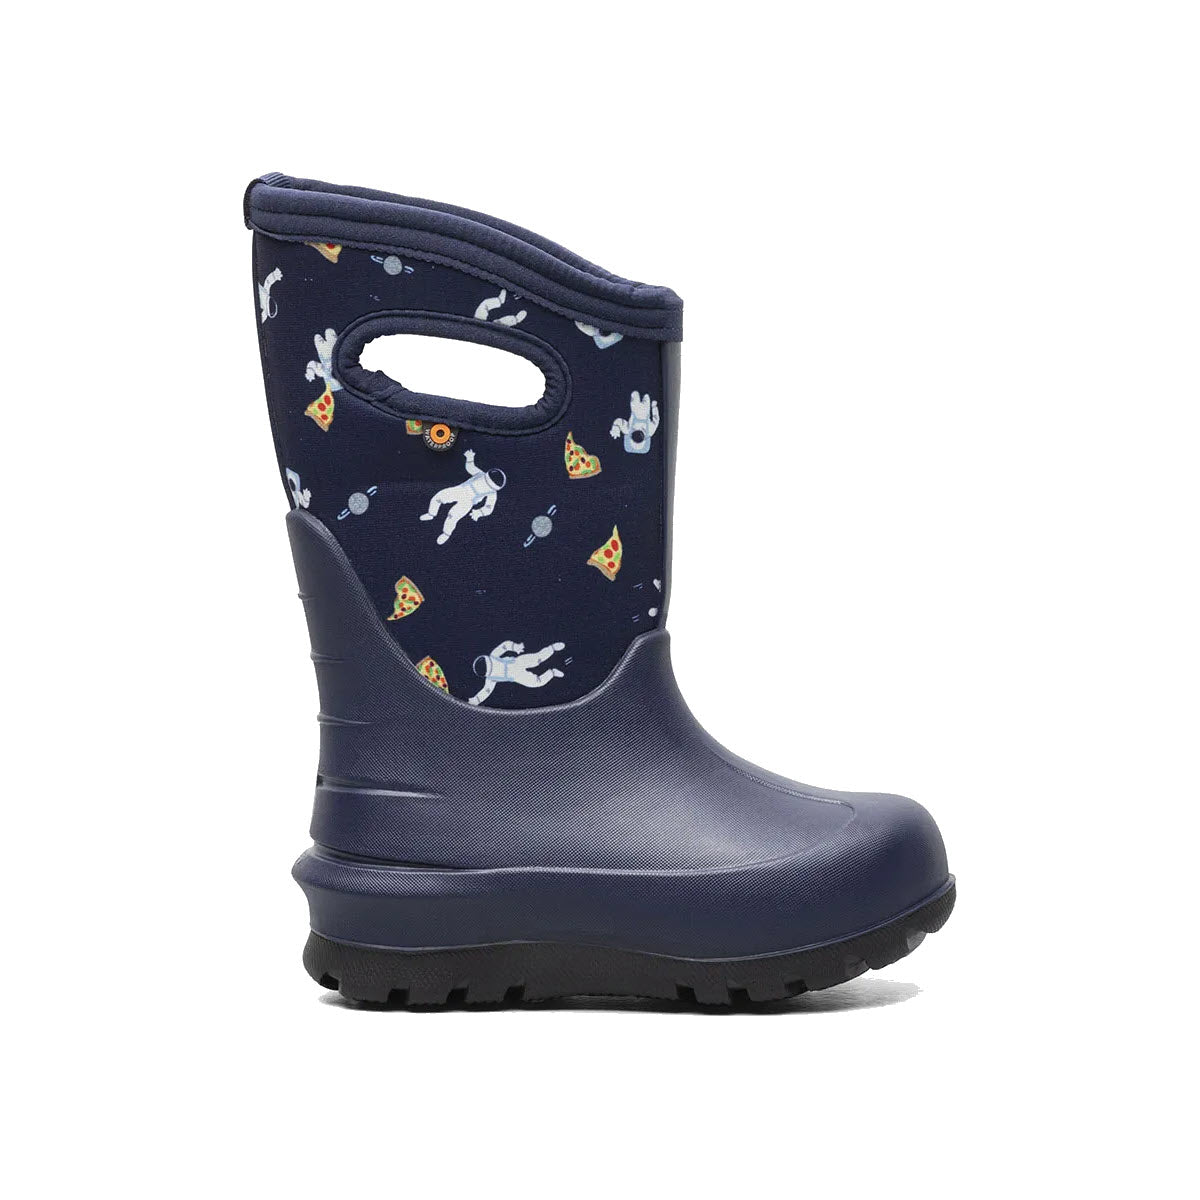 Children's Bogs navy blue waterproof rain boot with handle, featuring a playful pattern of white unicorns and yellow pizzas.